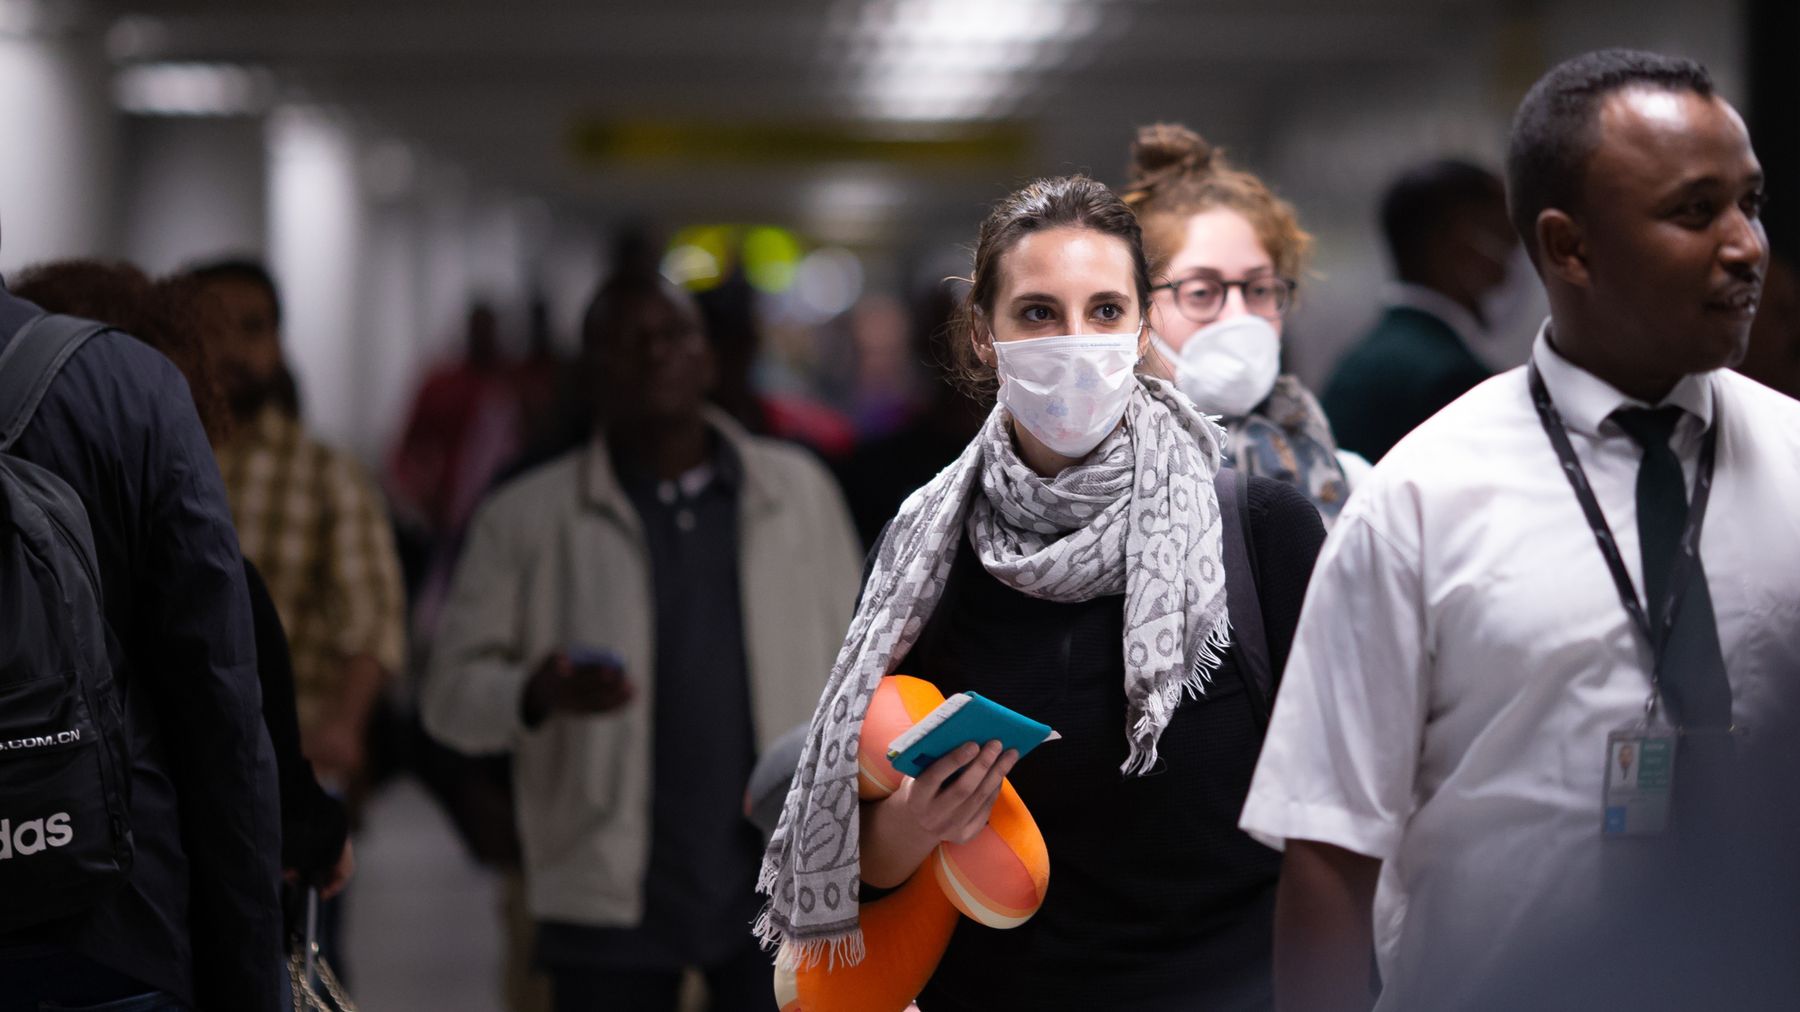 A passenger wears a mask arriving at an airport